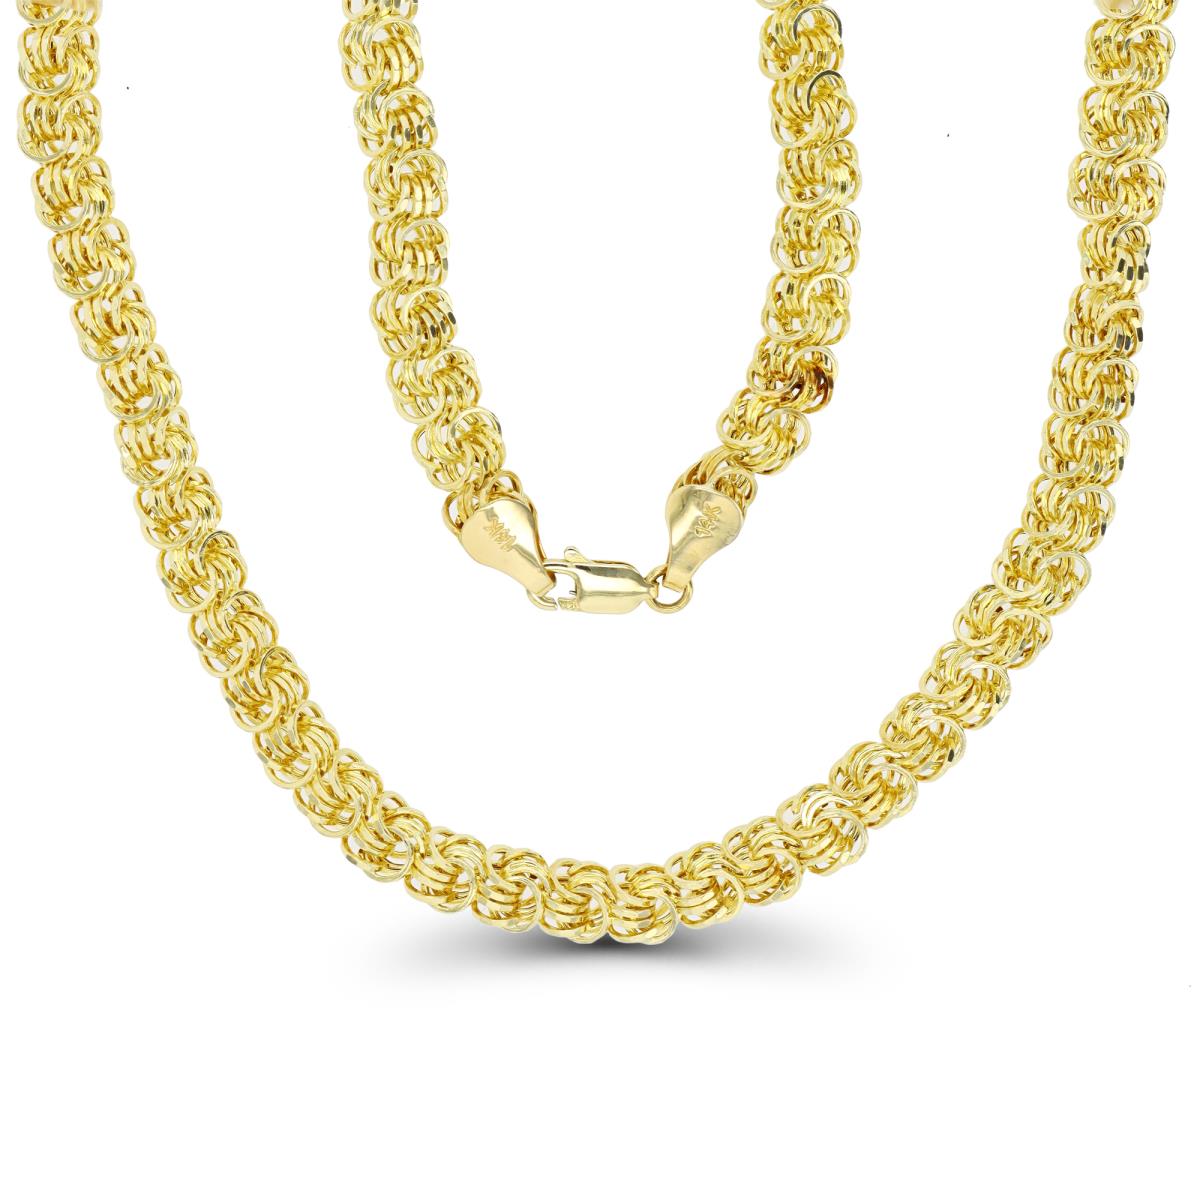 14K Yellow Gold 7mm Flat DC Round Link 17" Chain